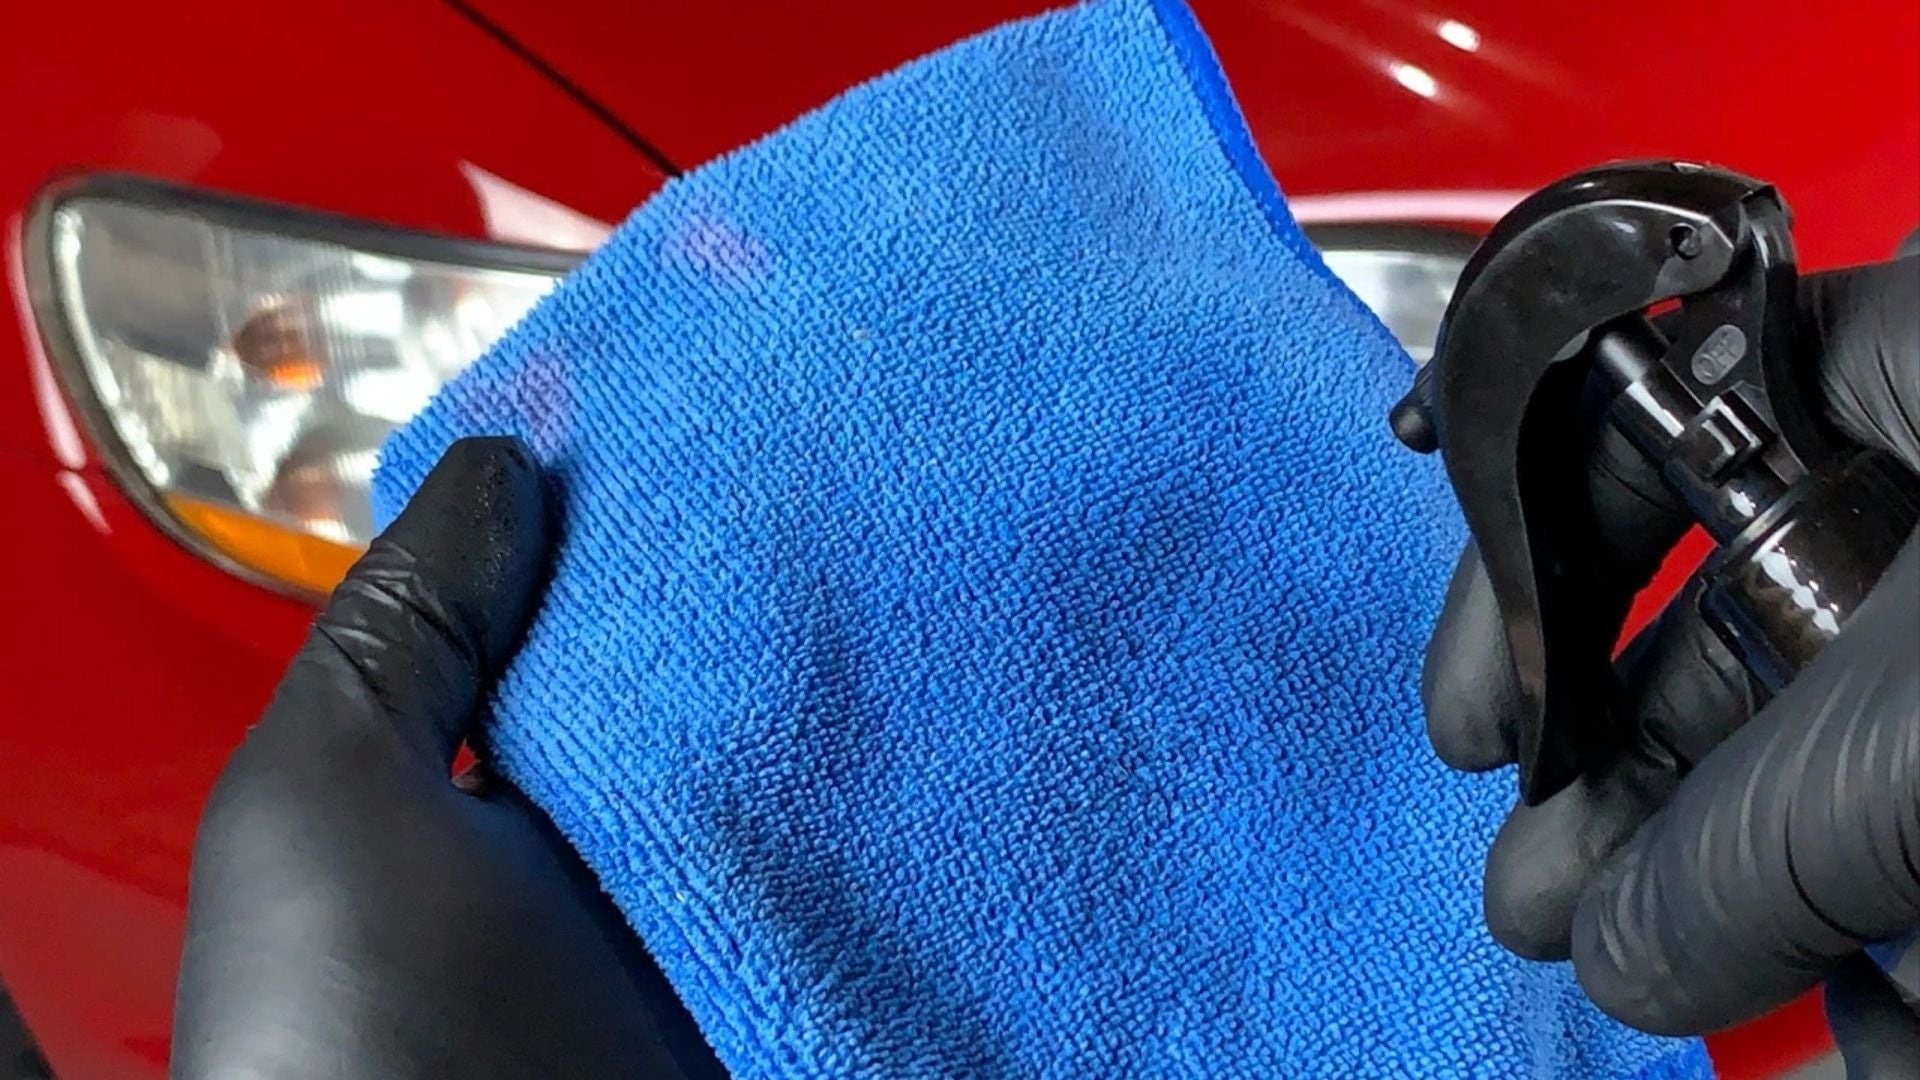 Shine Armor Ceramic Coating Test and Review